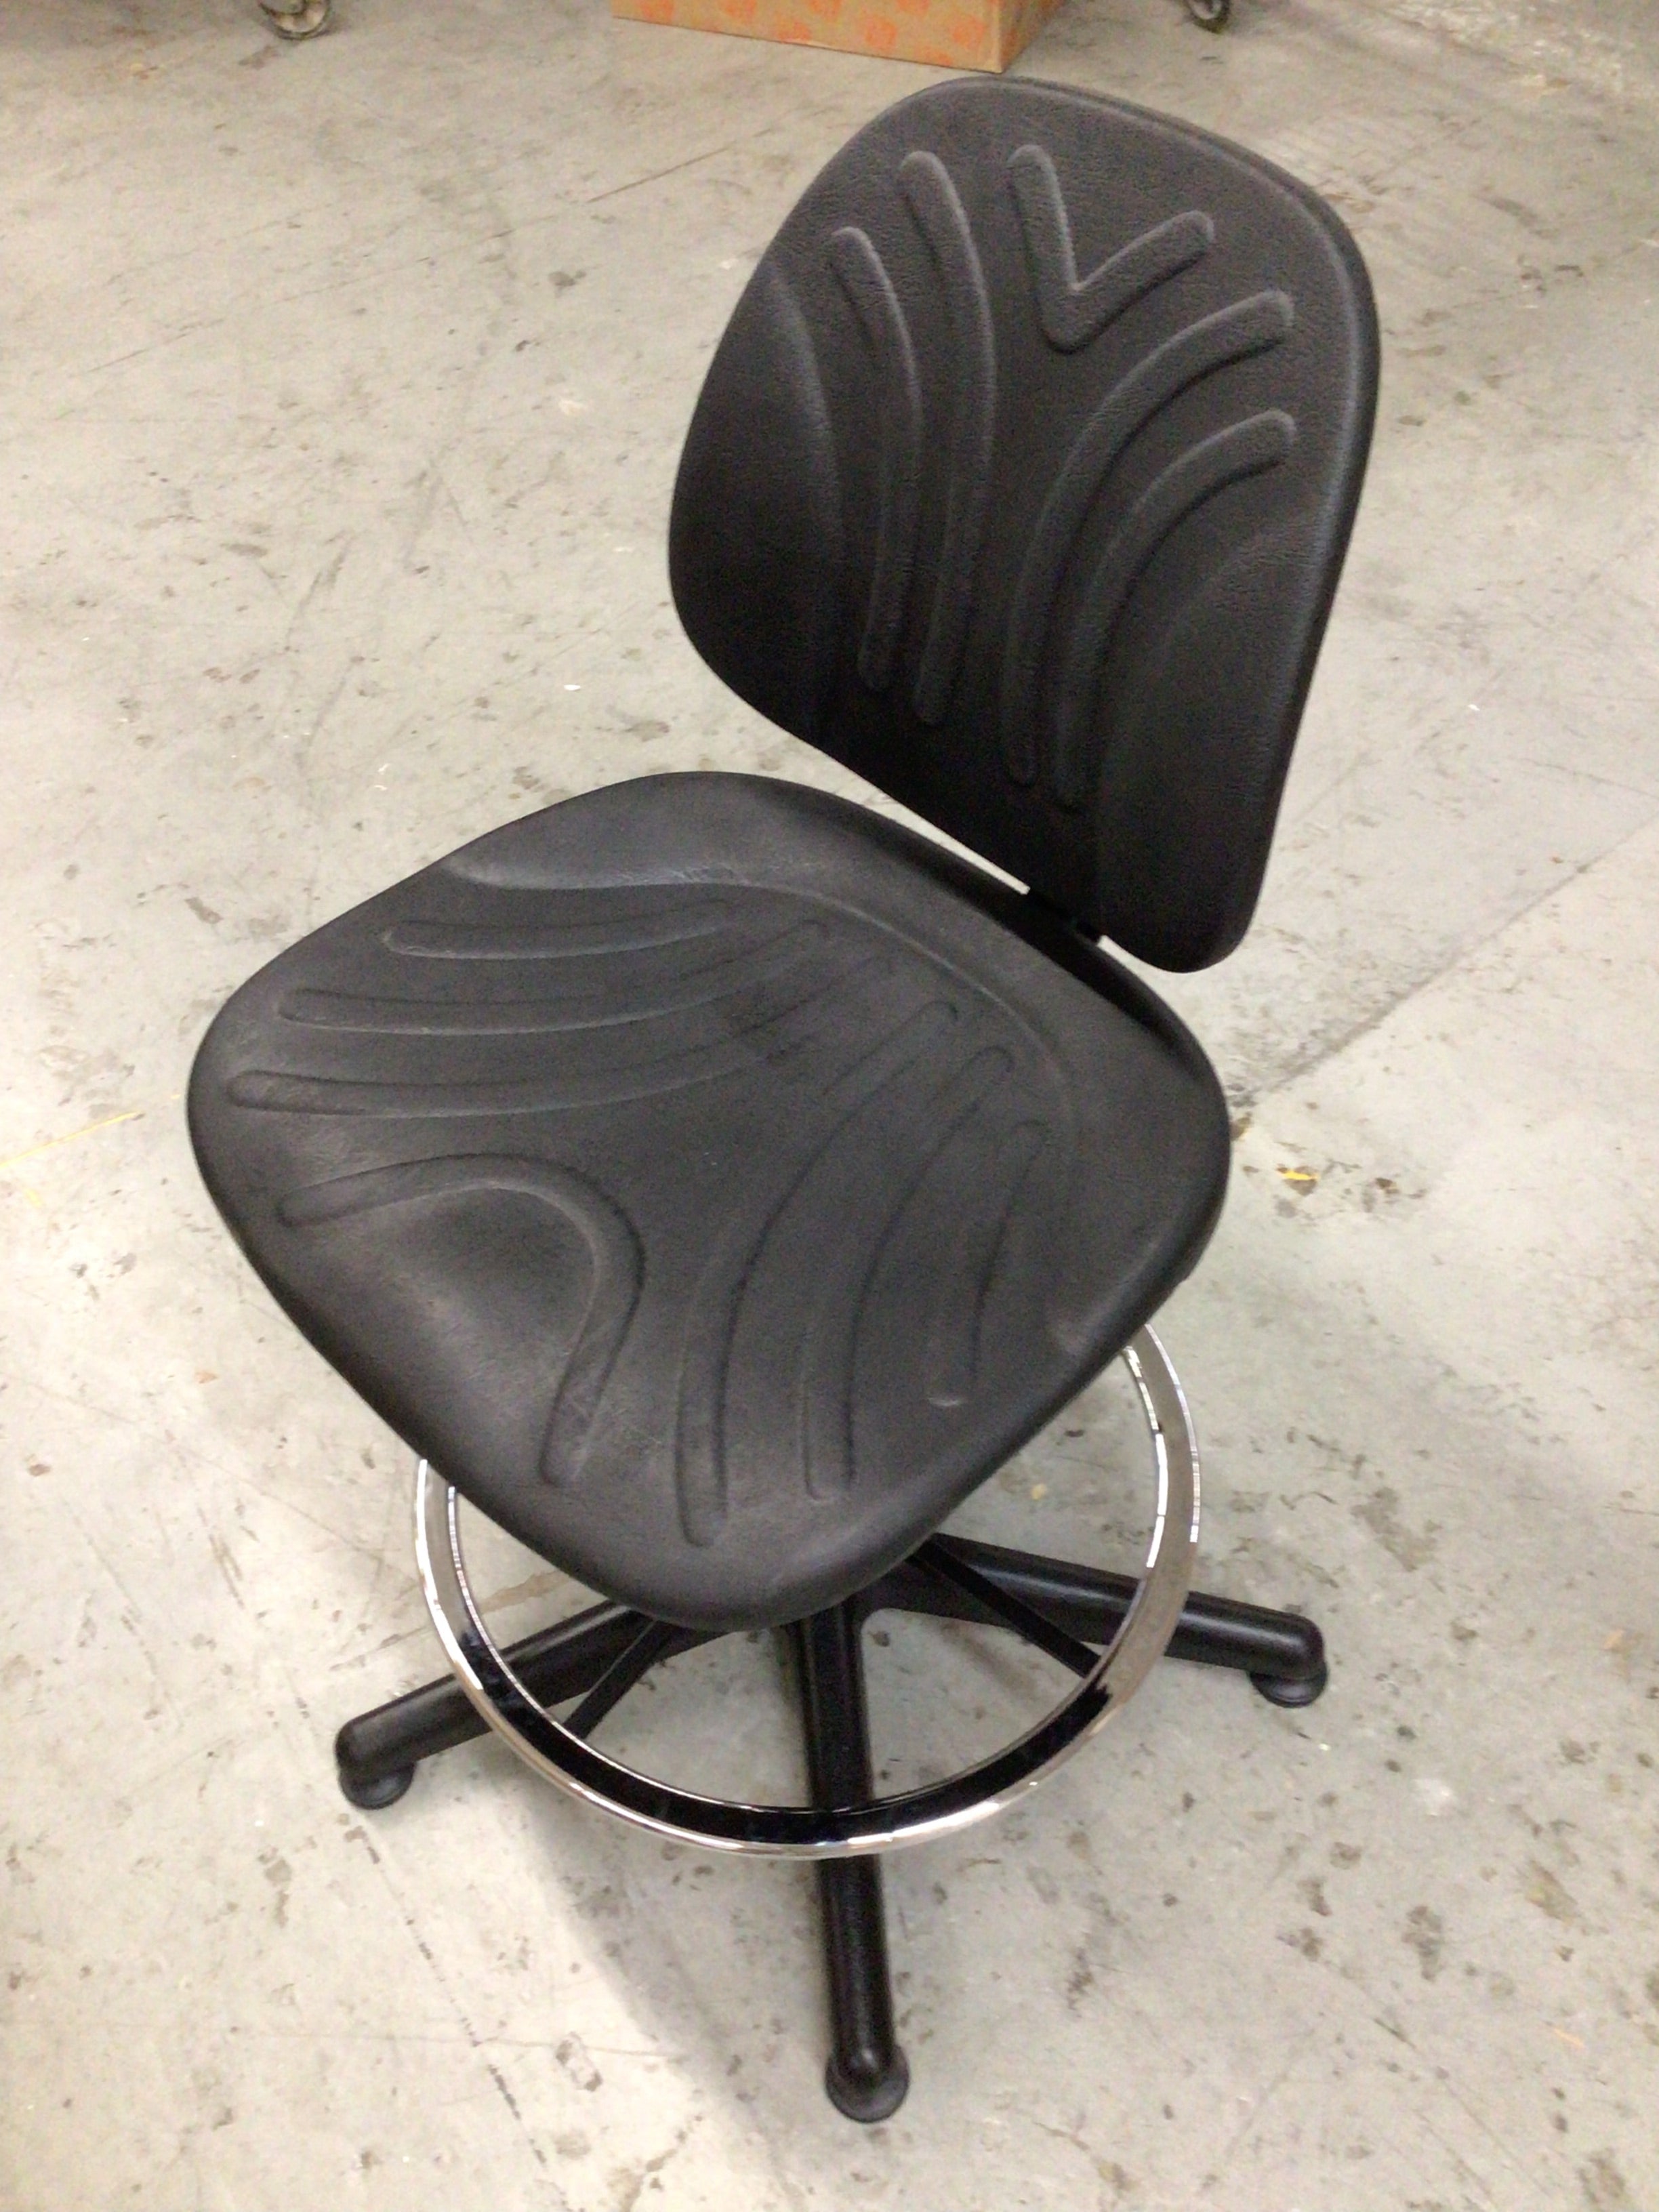 BEVCO Drafting Chair 7500D Polyurethane 350 lb 21 - 31 in Seat Height *OPEN BOX* (8129800306926)